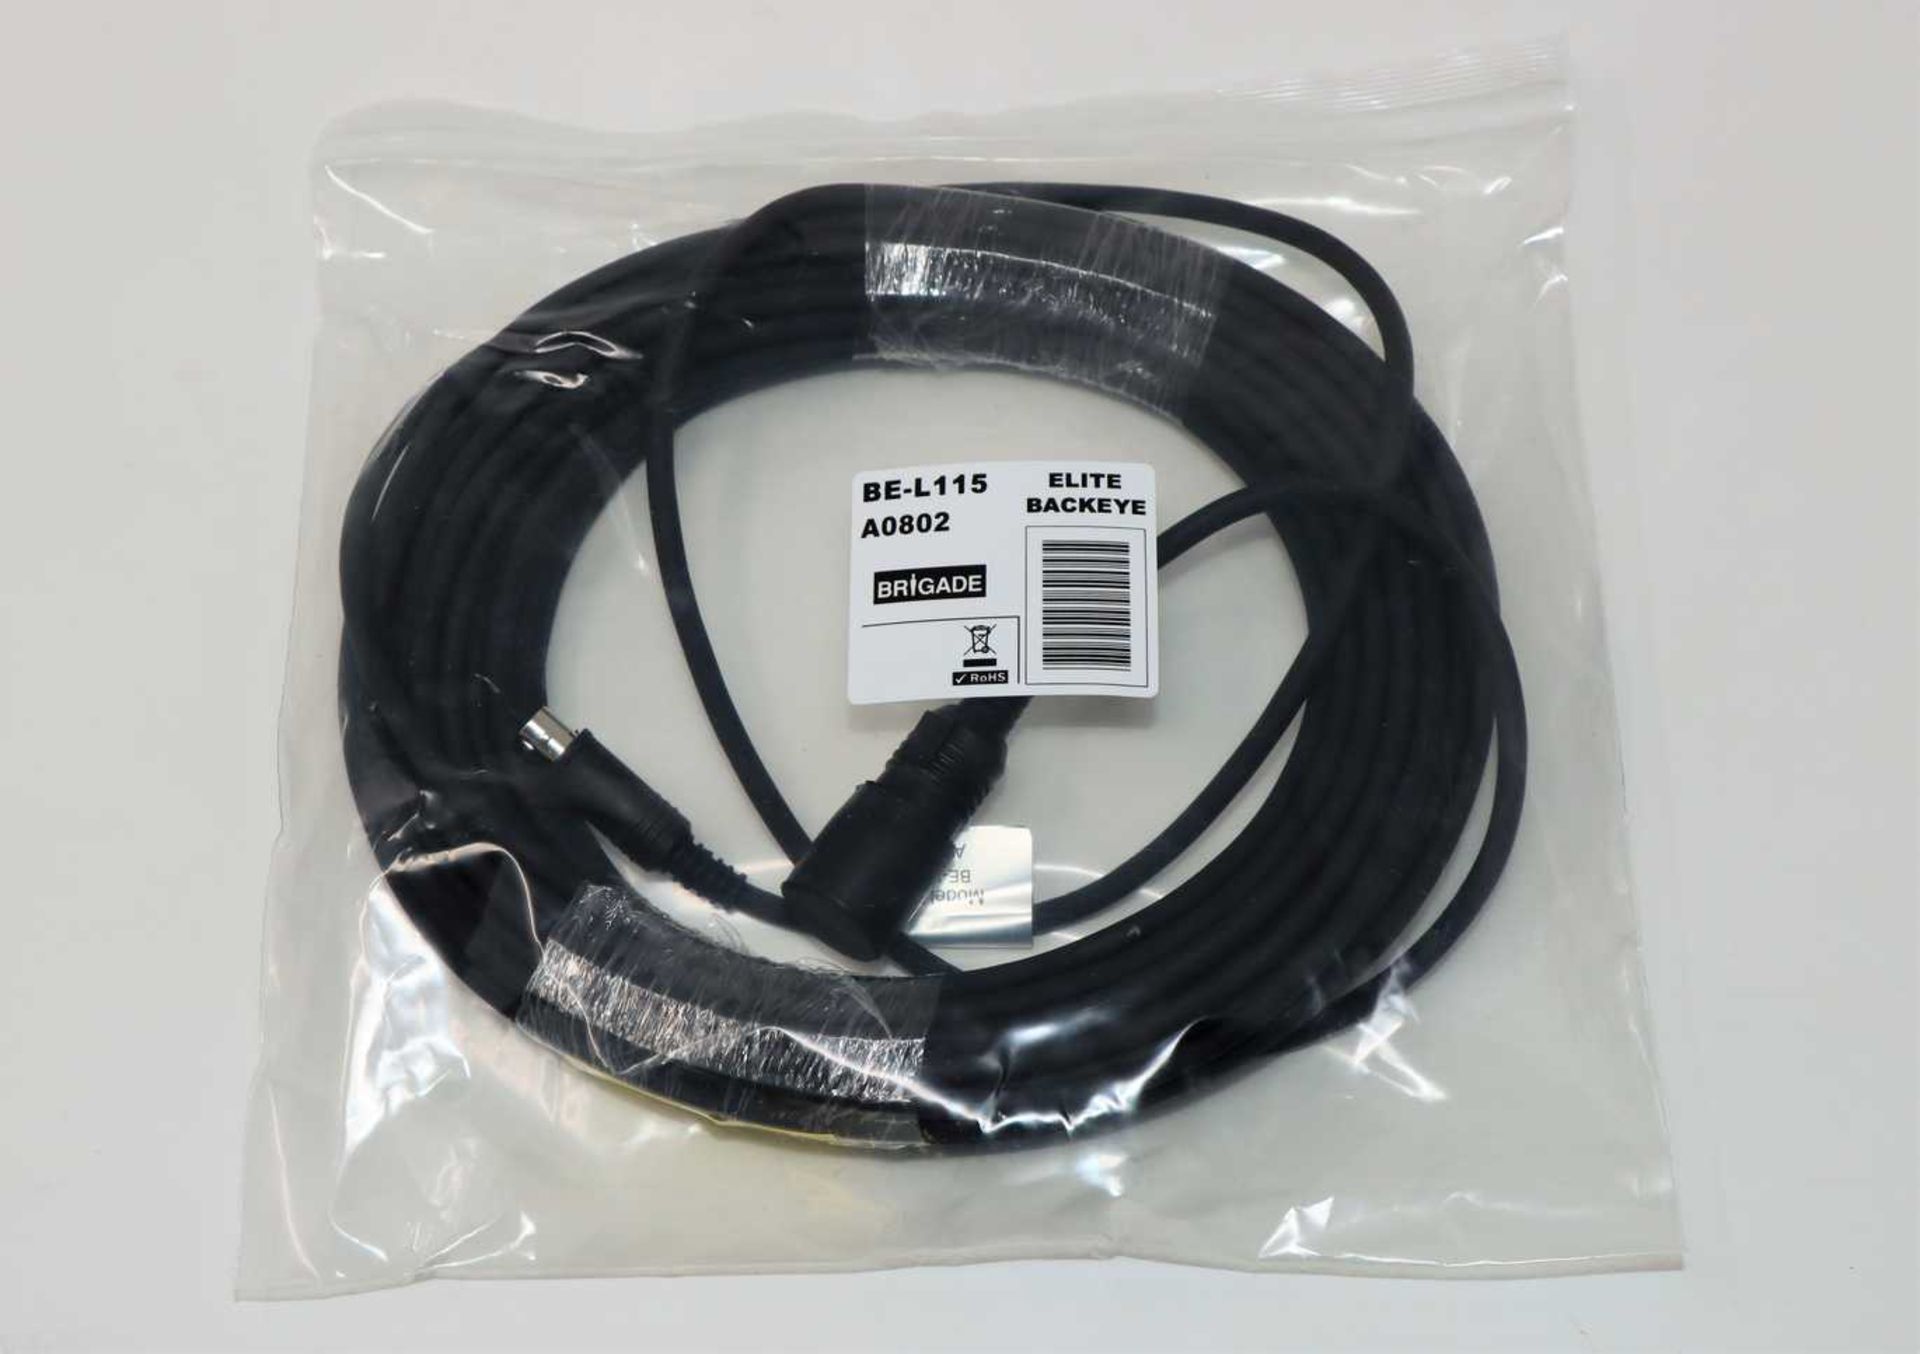 An as new Brigade BE-L115 A0802 Backeye Elite 15M Cable for Brigade Backeye Vehicle Camera Systems.